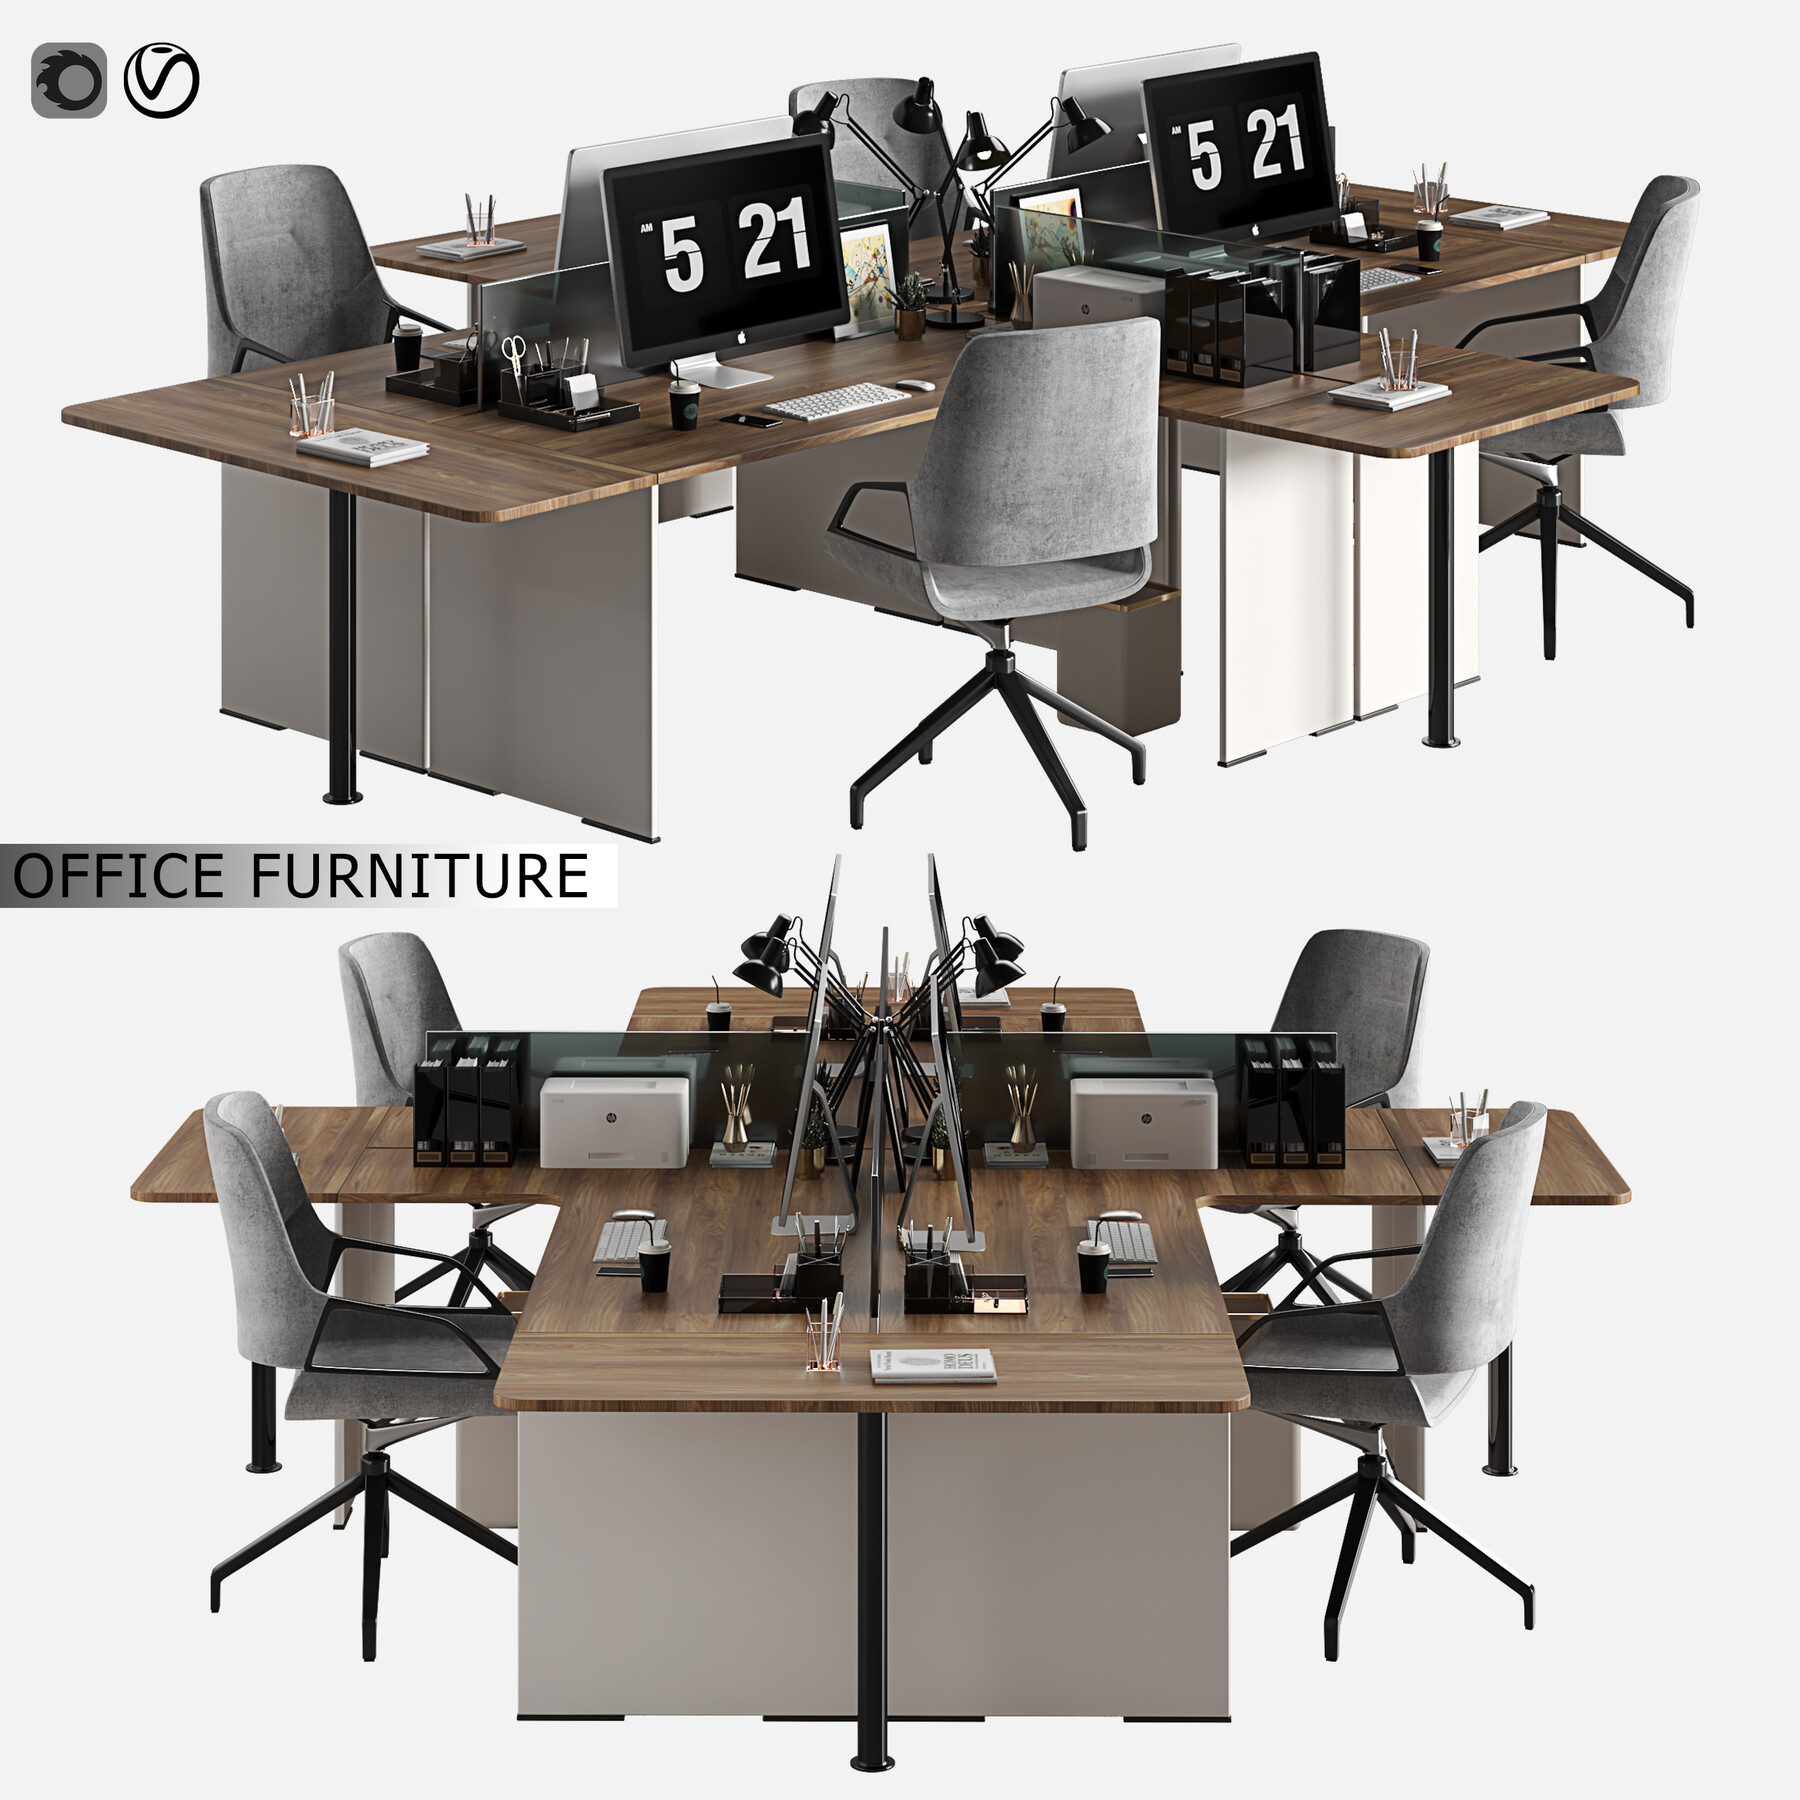 office furniture resources